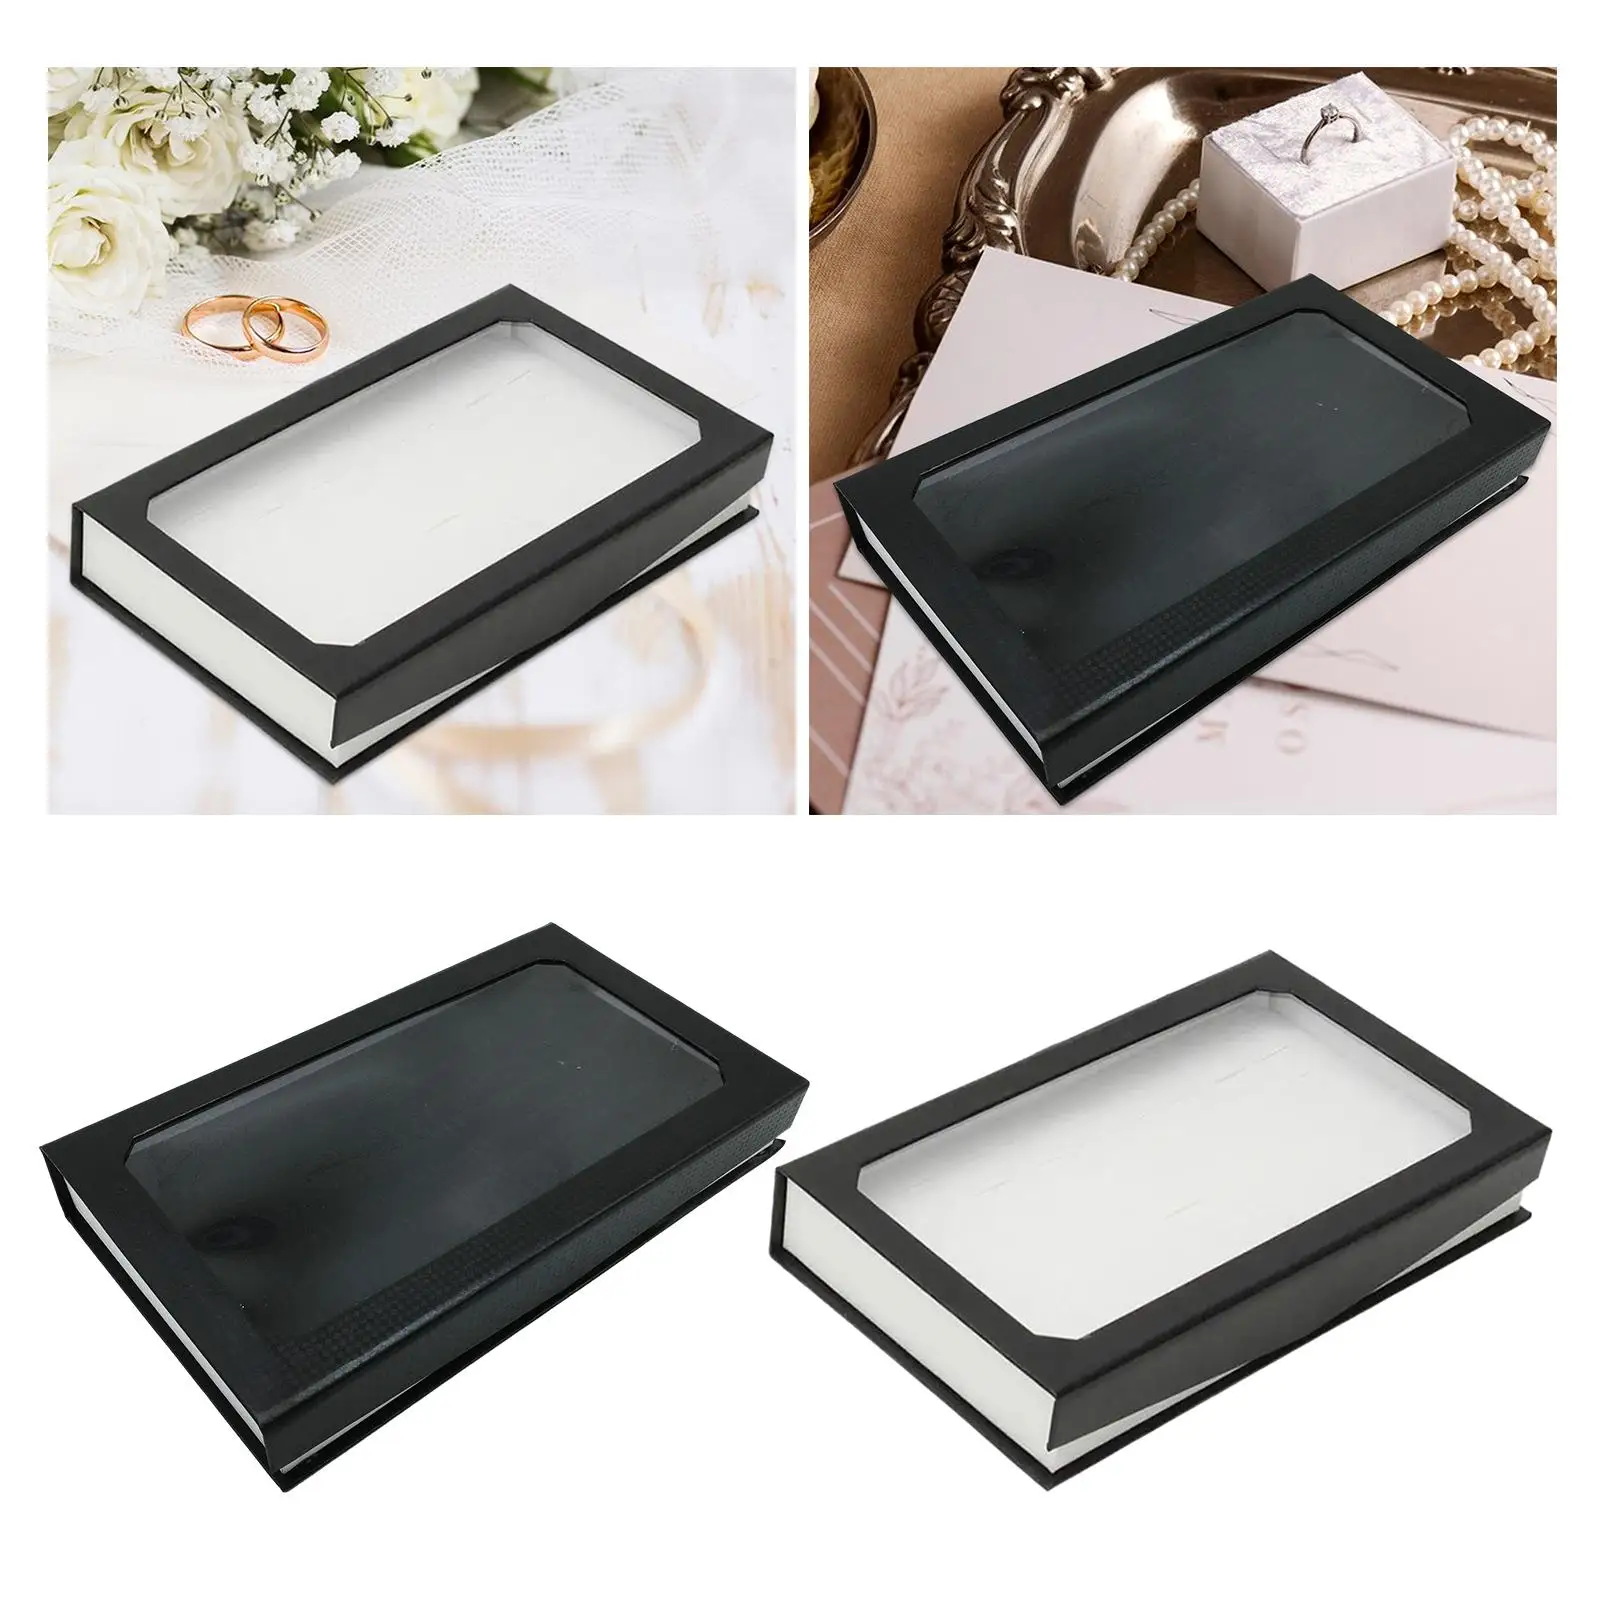 Rings Display Tray Earring Holder Shelves Portable Gifts Homes Jewelry Storage Organizer Storage Box for Rings Studs Earrings